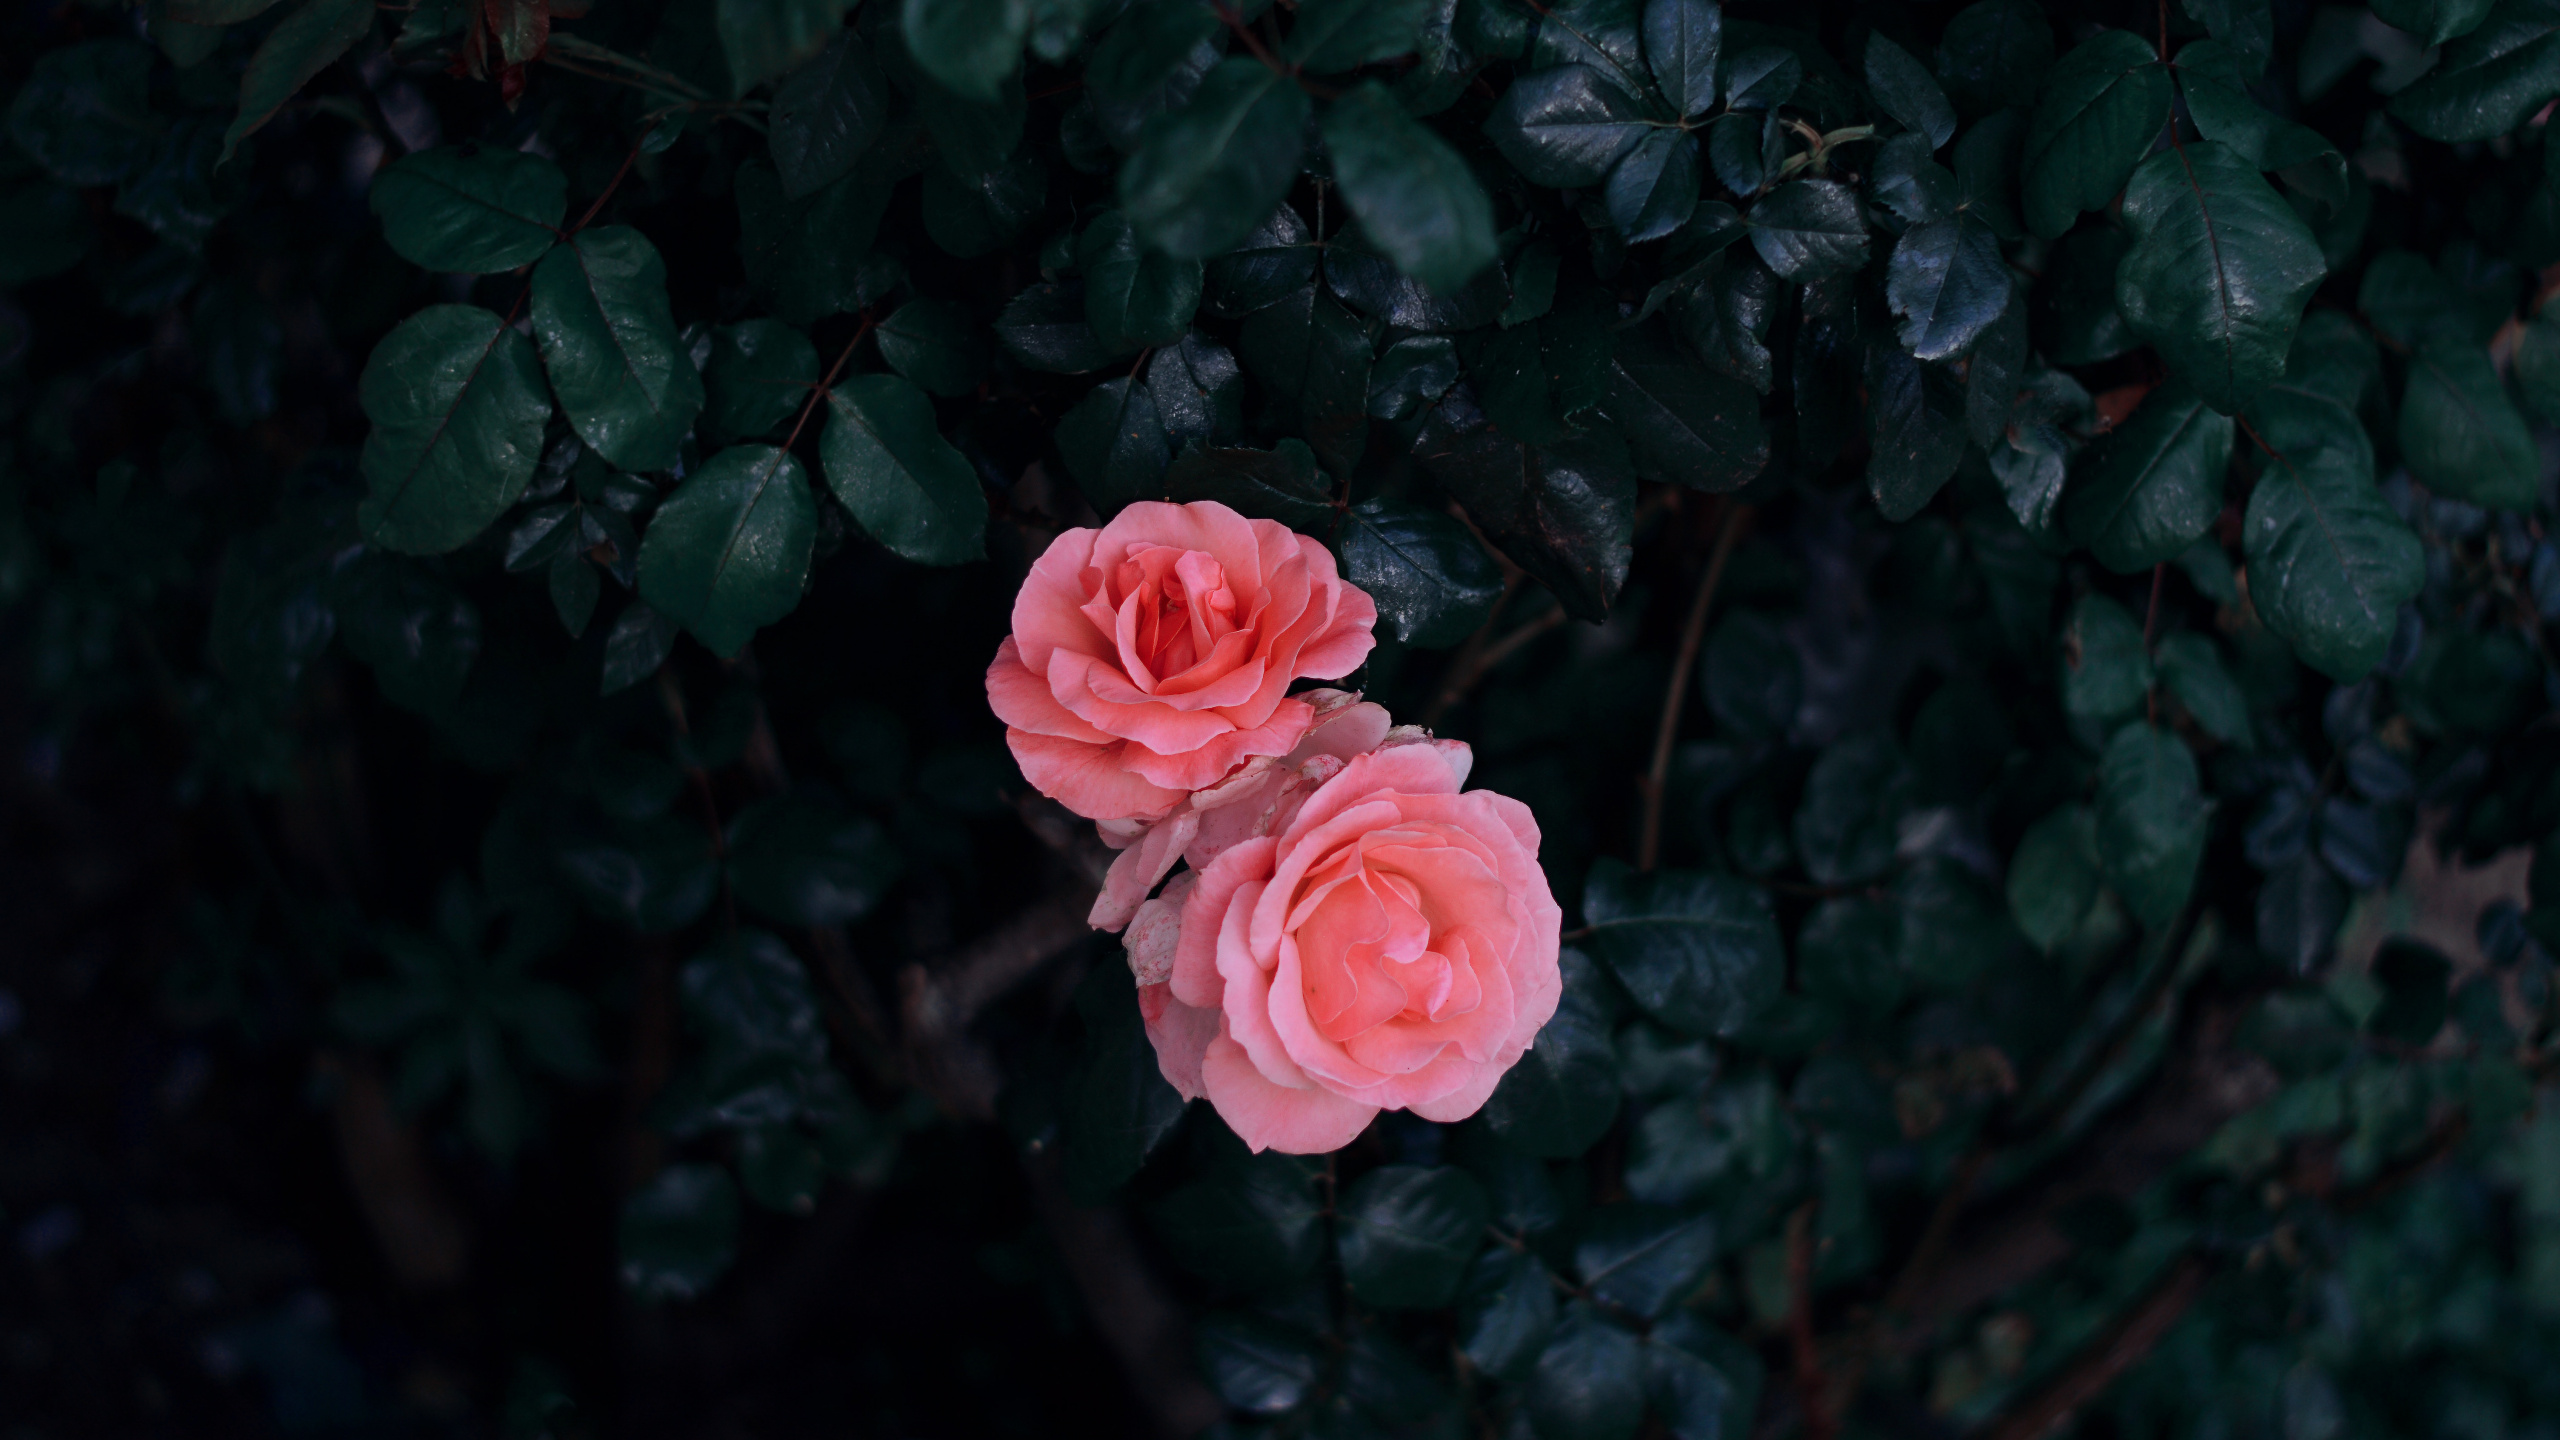 Pink Rose in Bloom During Daytime. Wallpaper in 2560x1440 Resolution